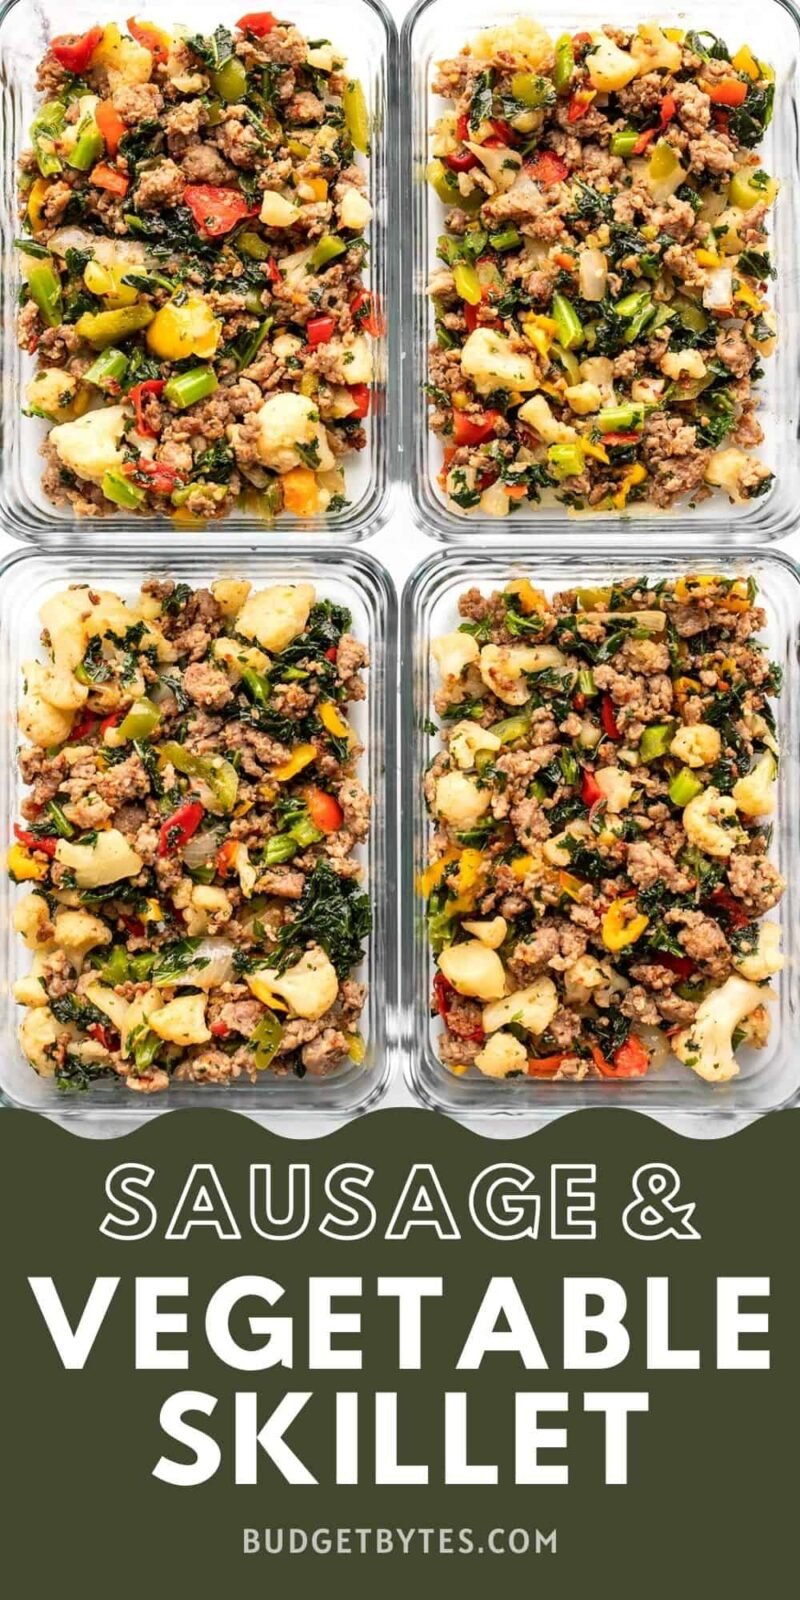 sausage and vegetable skillet in glass meal prep containers.